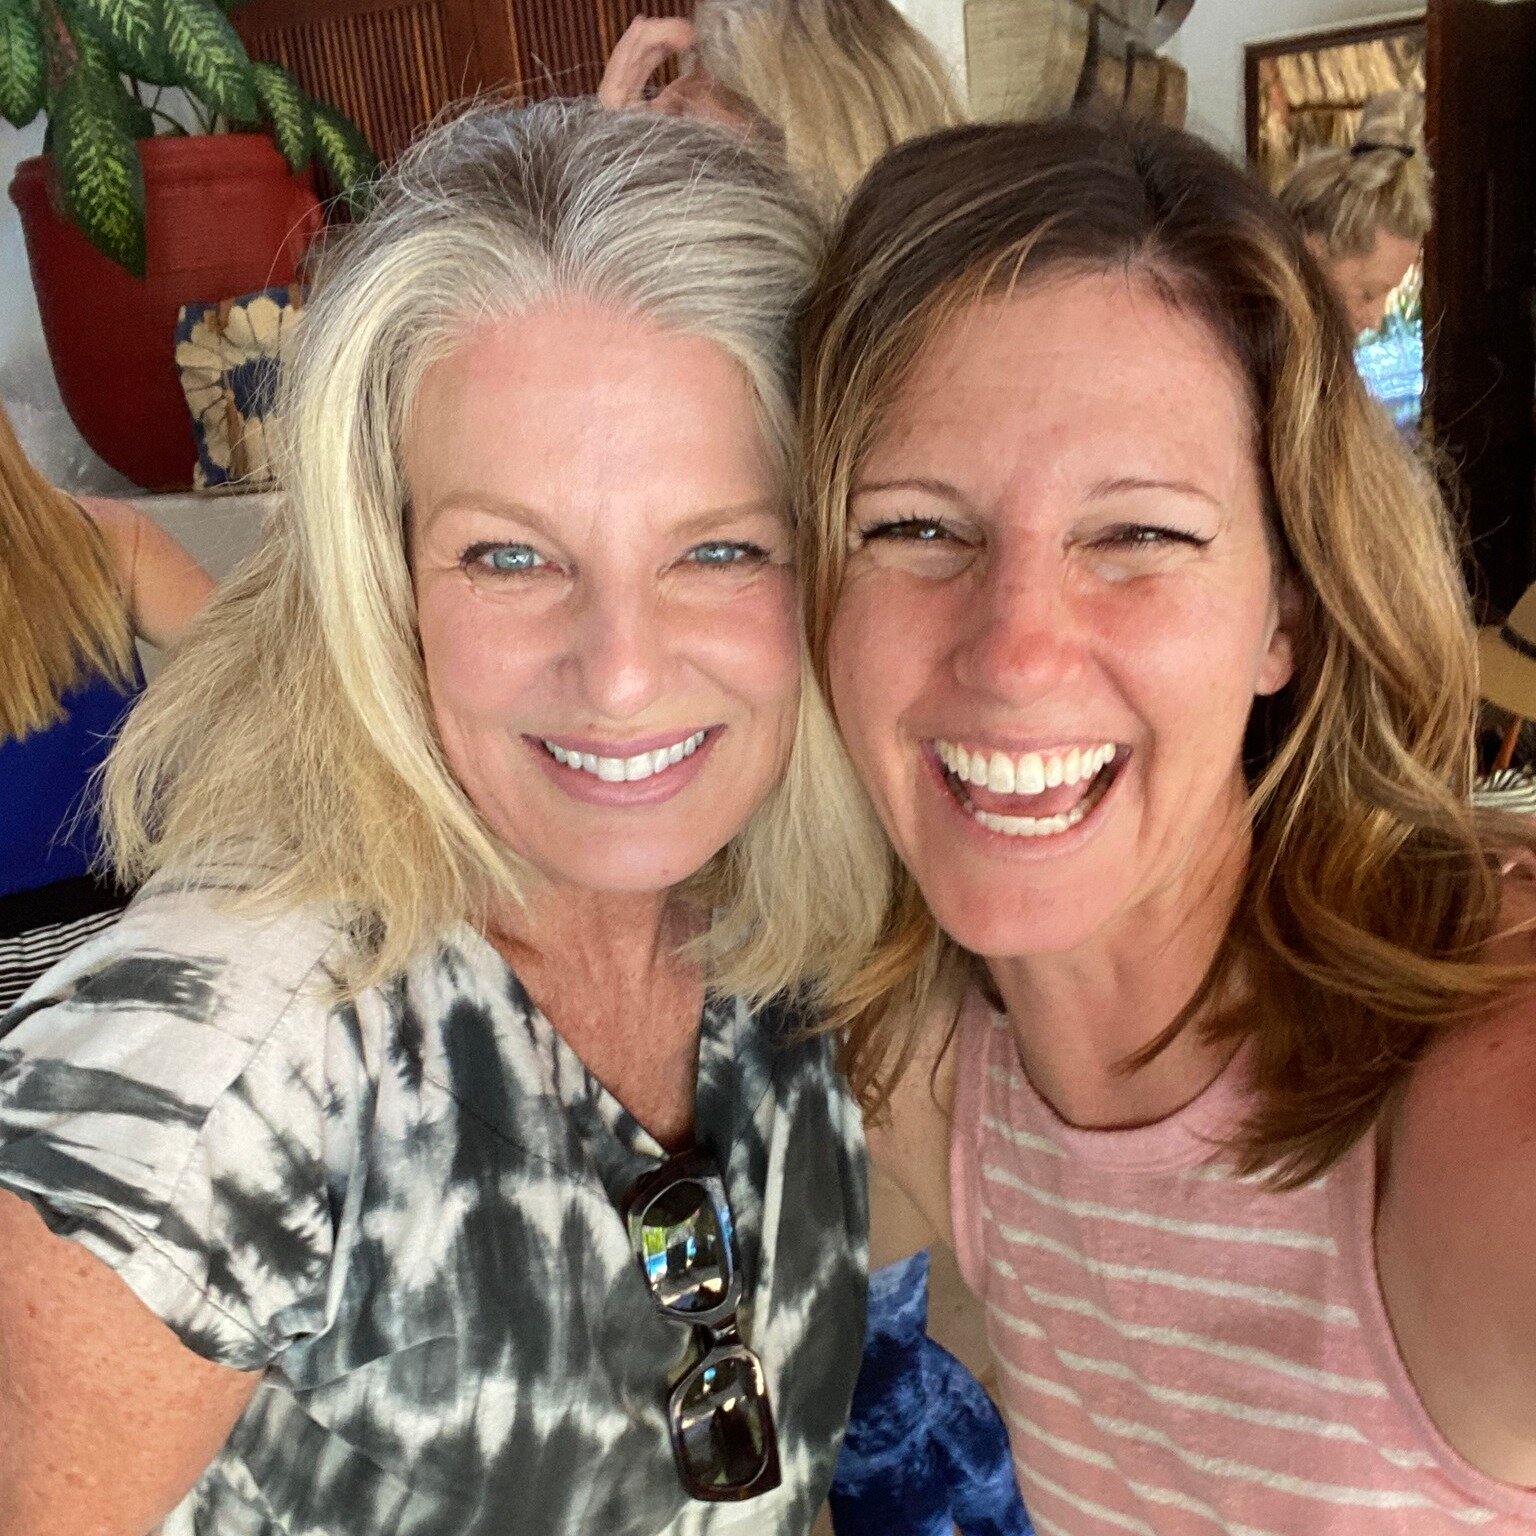 Struggling to make an impact in your marketplace?
 
Everyone is searching for an edge &ndash; a way to stand out in the crowd and be seen by their perfect clients. 

That's why my friend and marketing expert, Debbie White, created the Lighthouse Effe